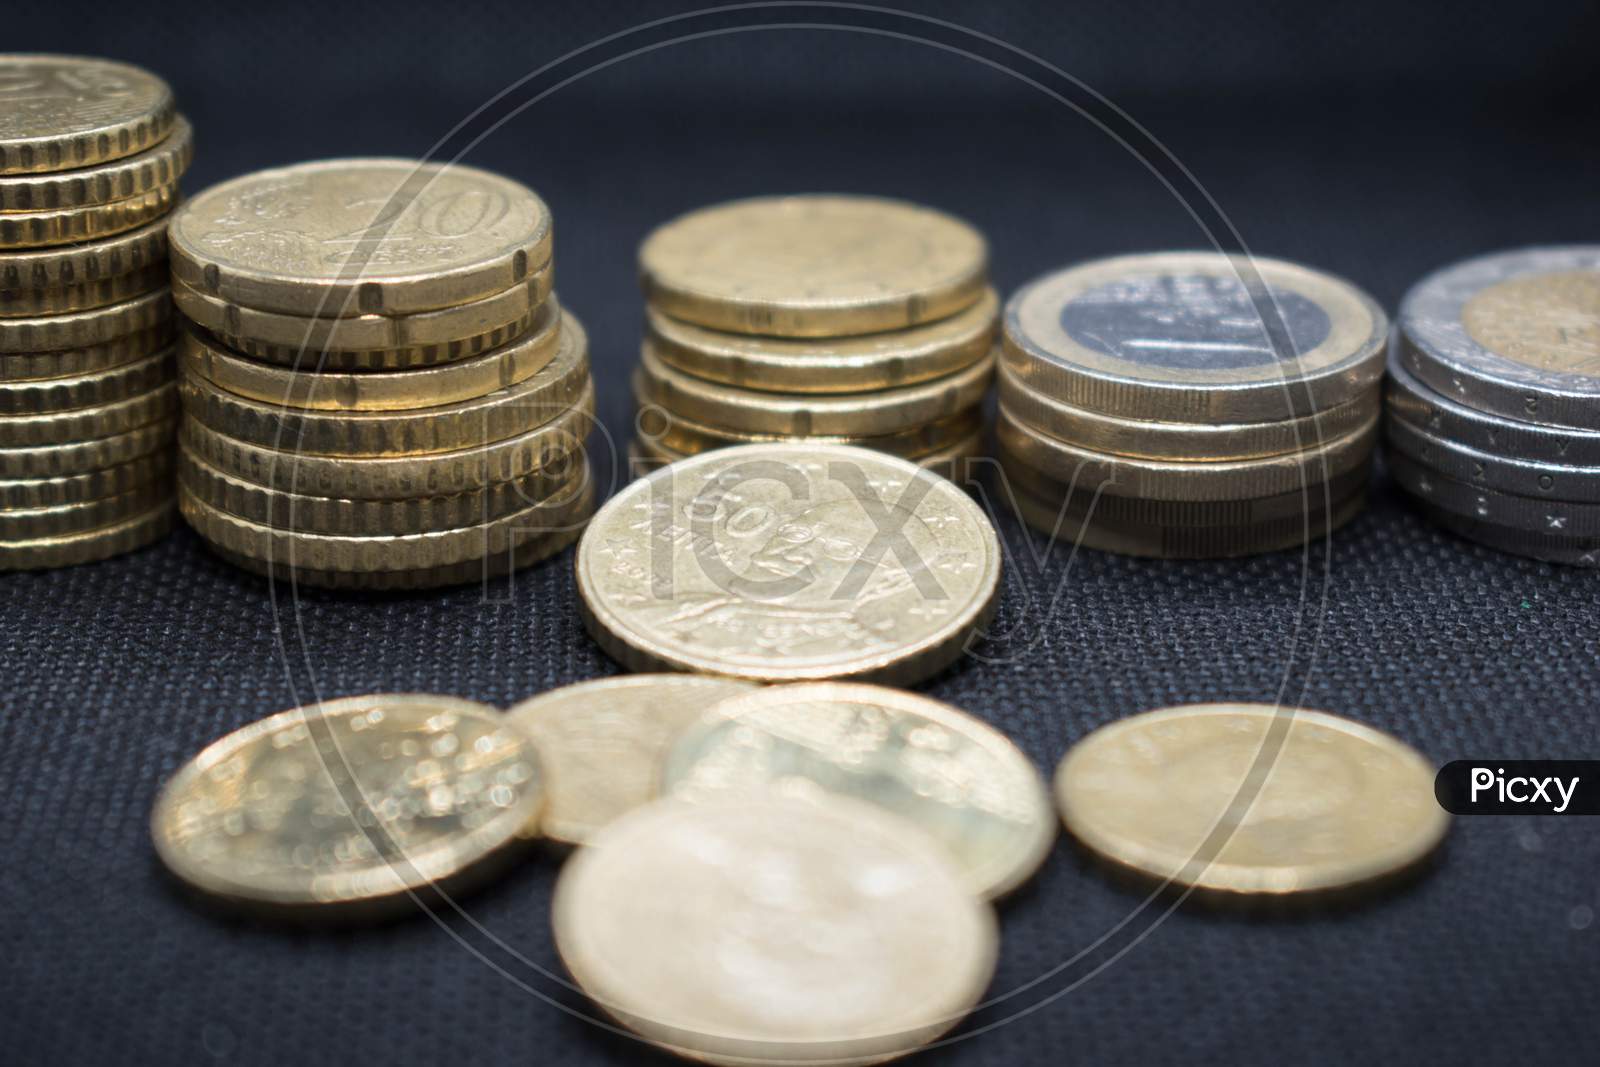 Euro Coins Stacks On Black Background In Different Positions.Euro Coins Stacked In Different Combinations